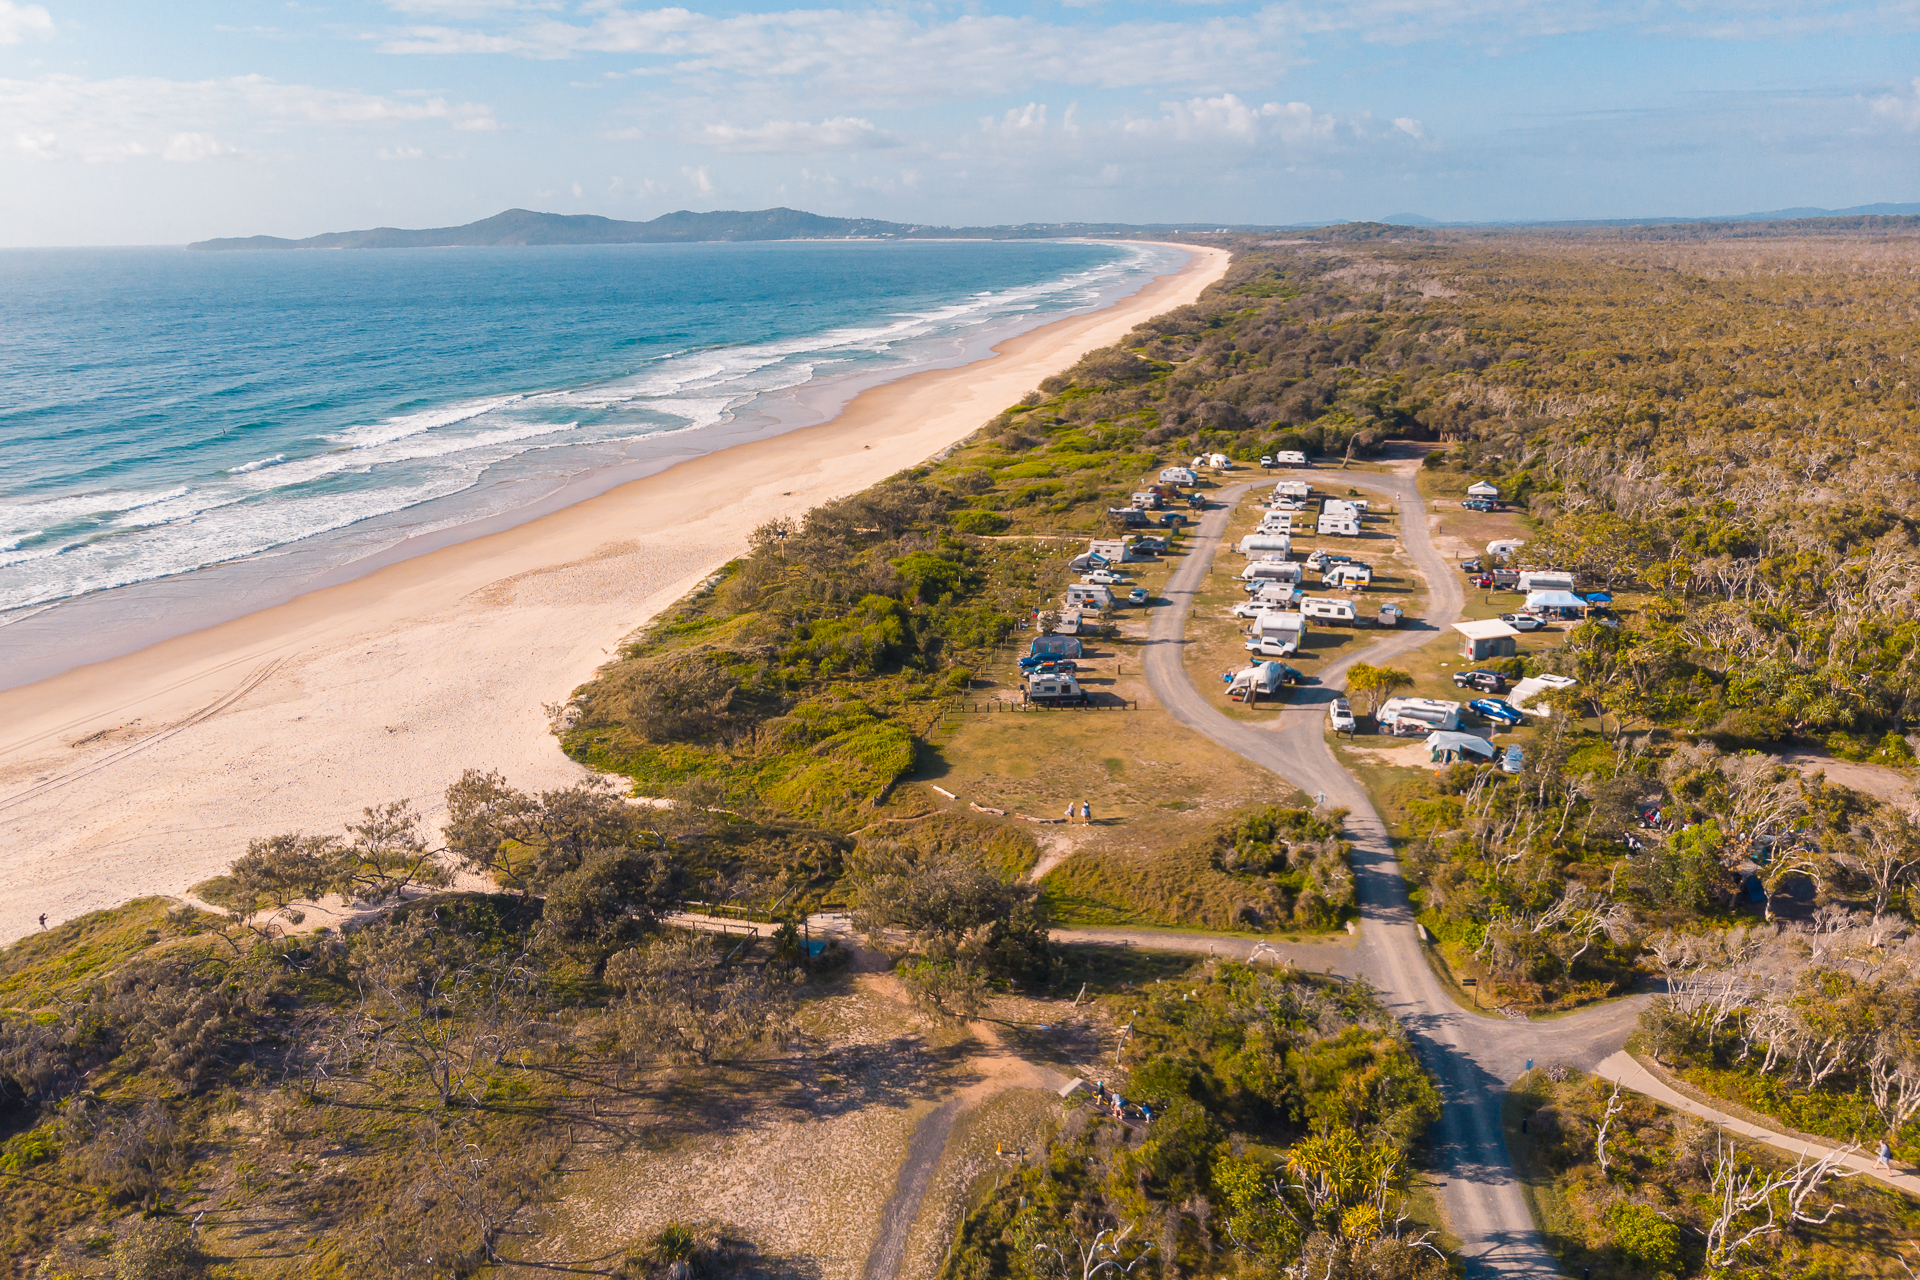 Aerial view of a camping site by the beach surrounded by nature visited during a road trip in Australia